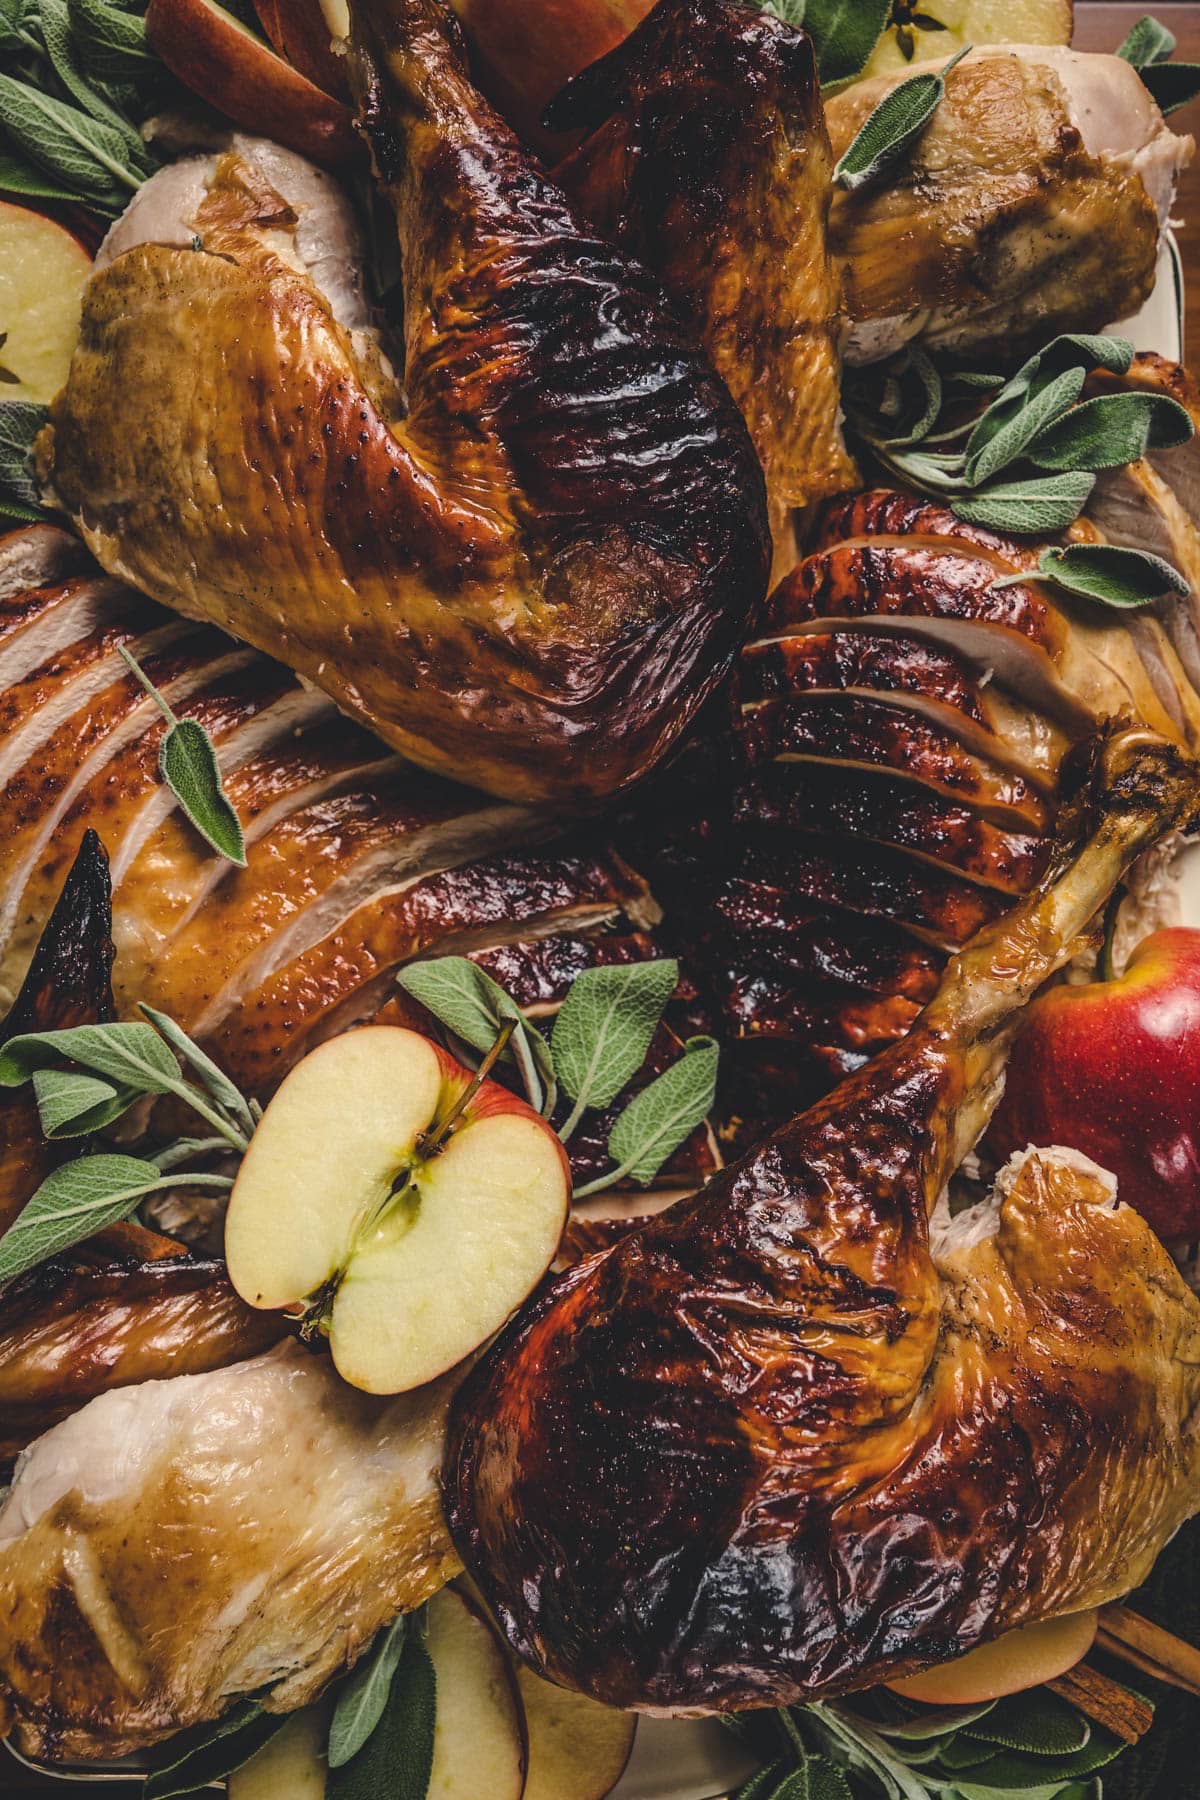 Apple honey glazed turkey, carved and placed onto a white serving platter with gold rim. Turkey is surrounded by cinnamon sticks, apples, and sage leaves.